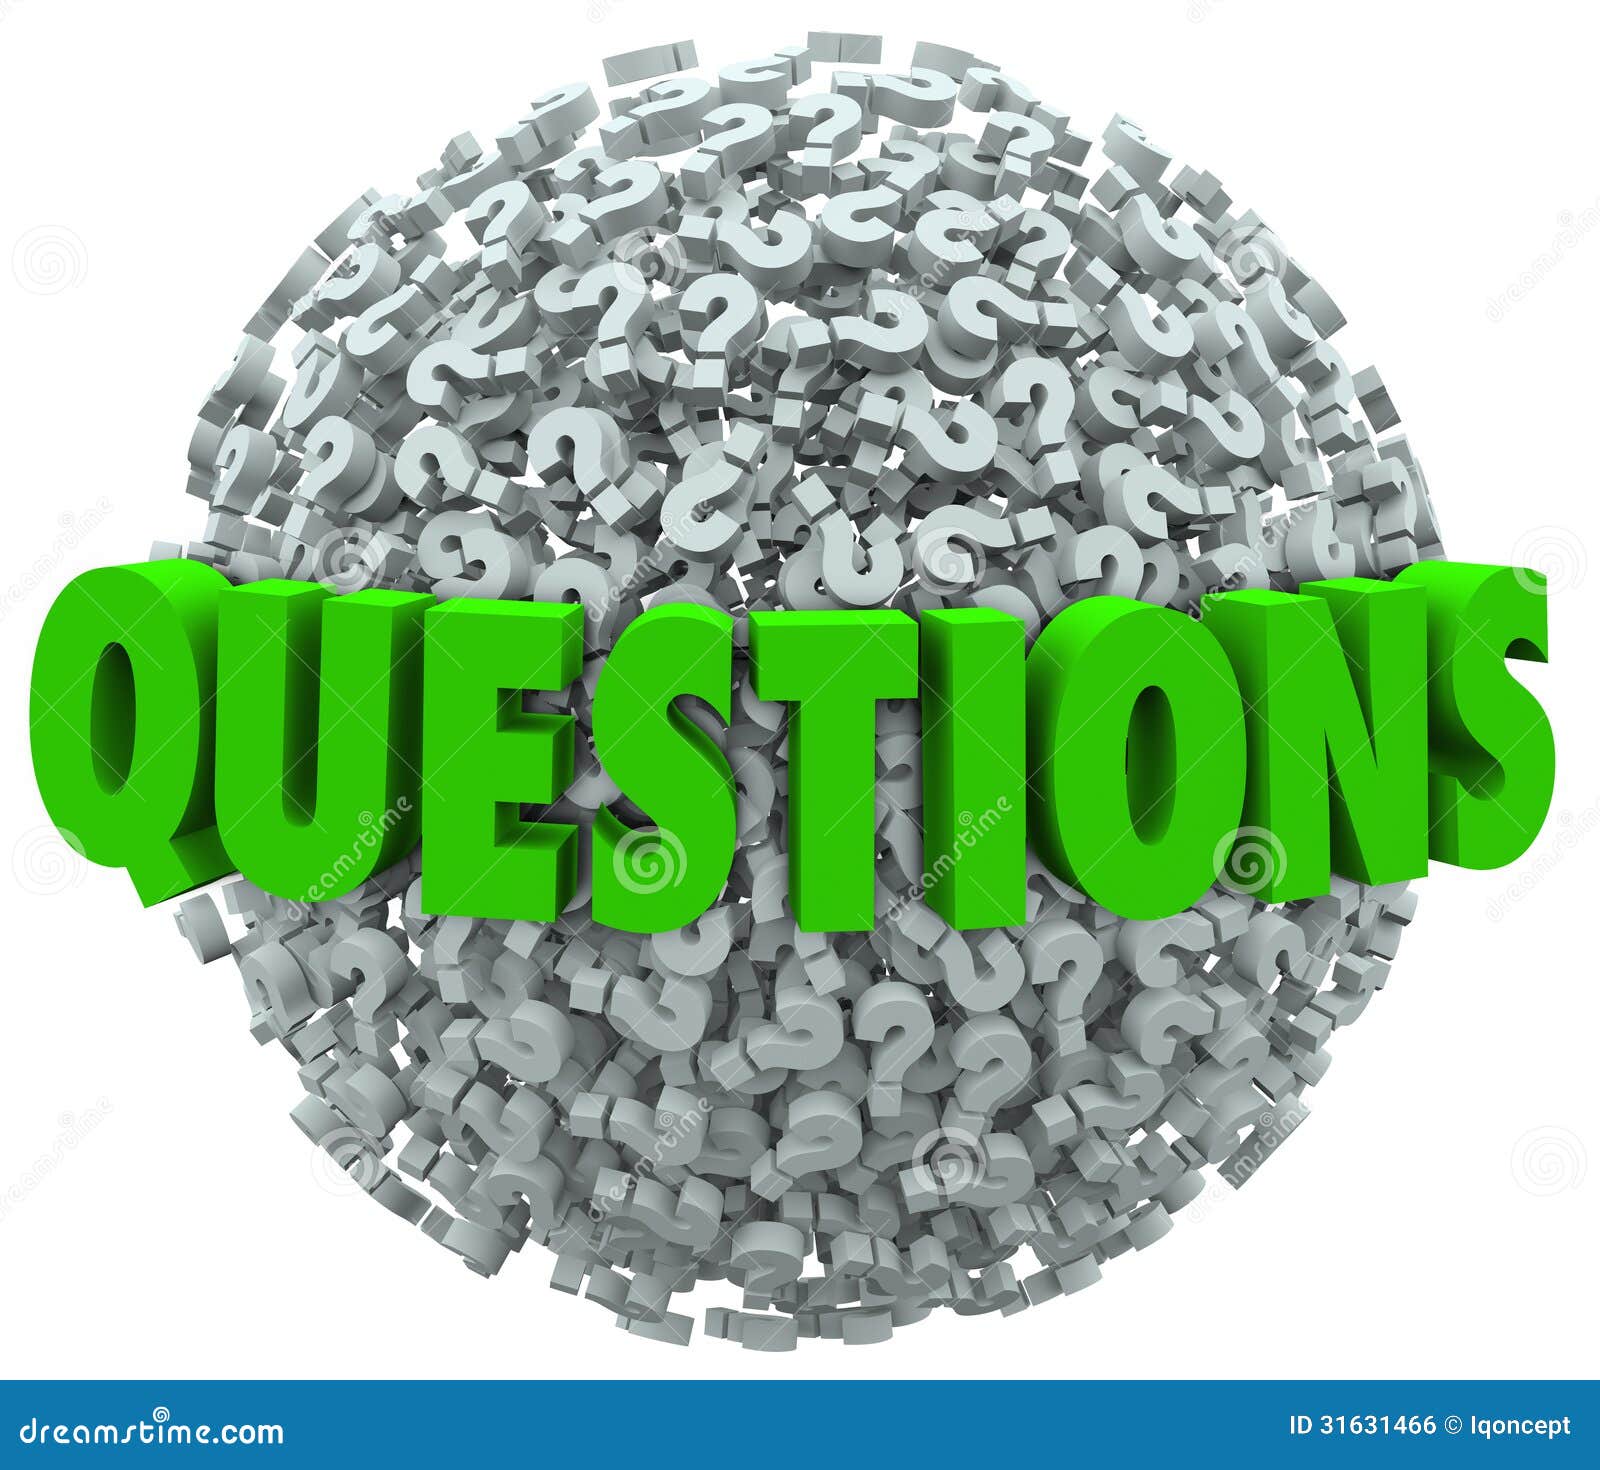 clipart for question words - photo #41